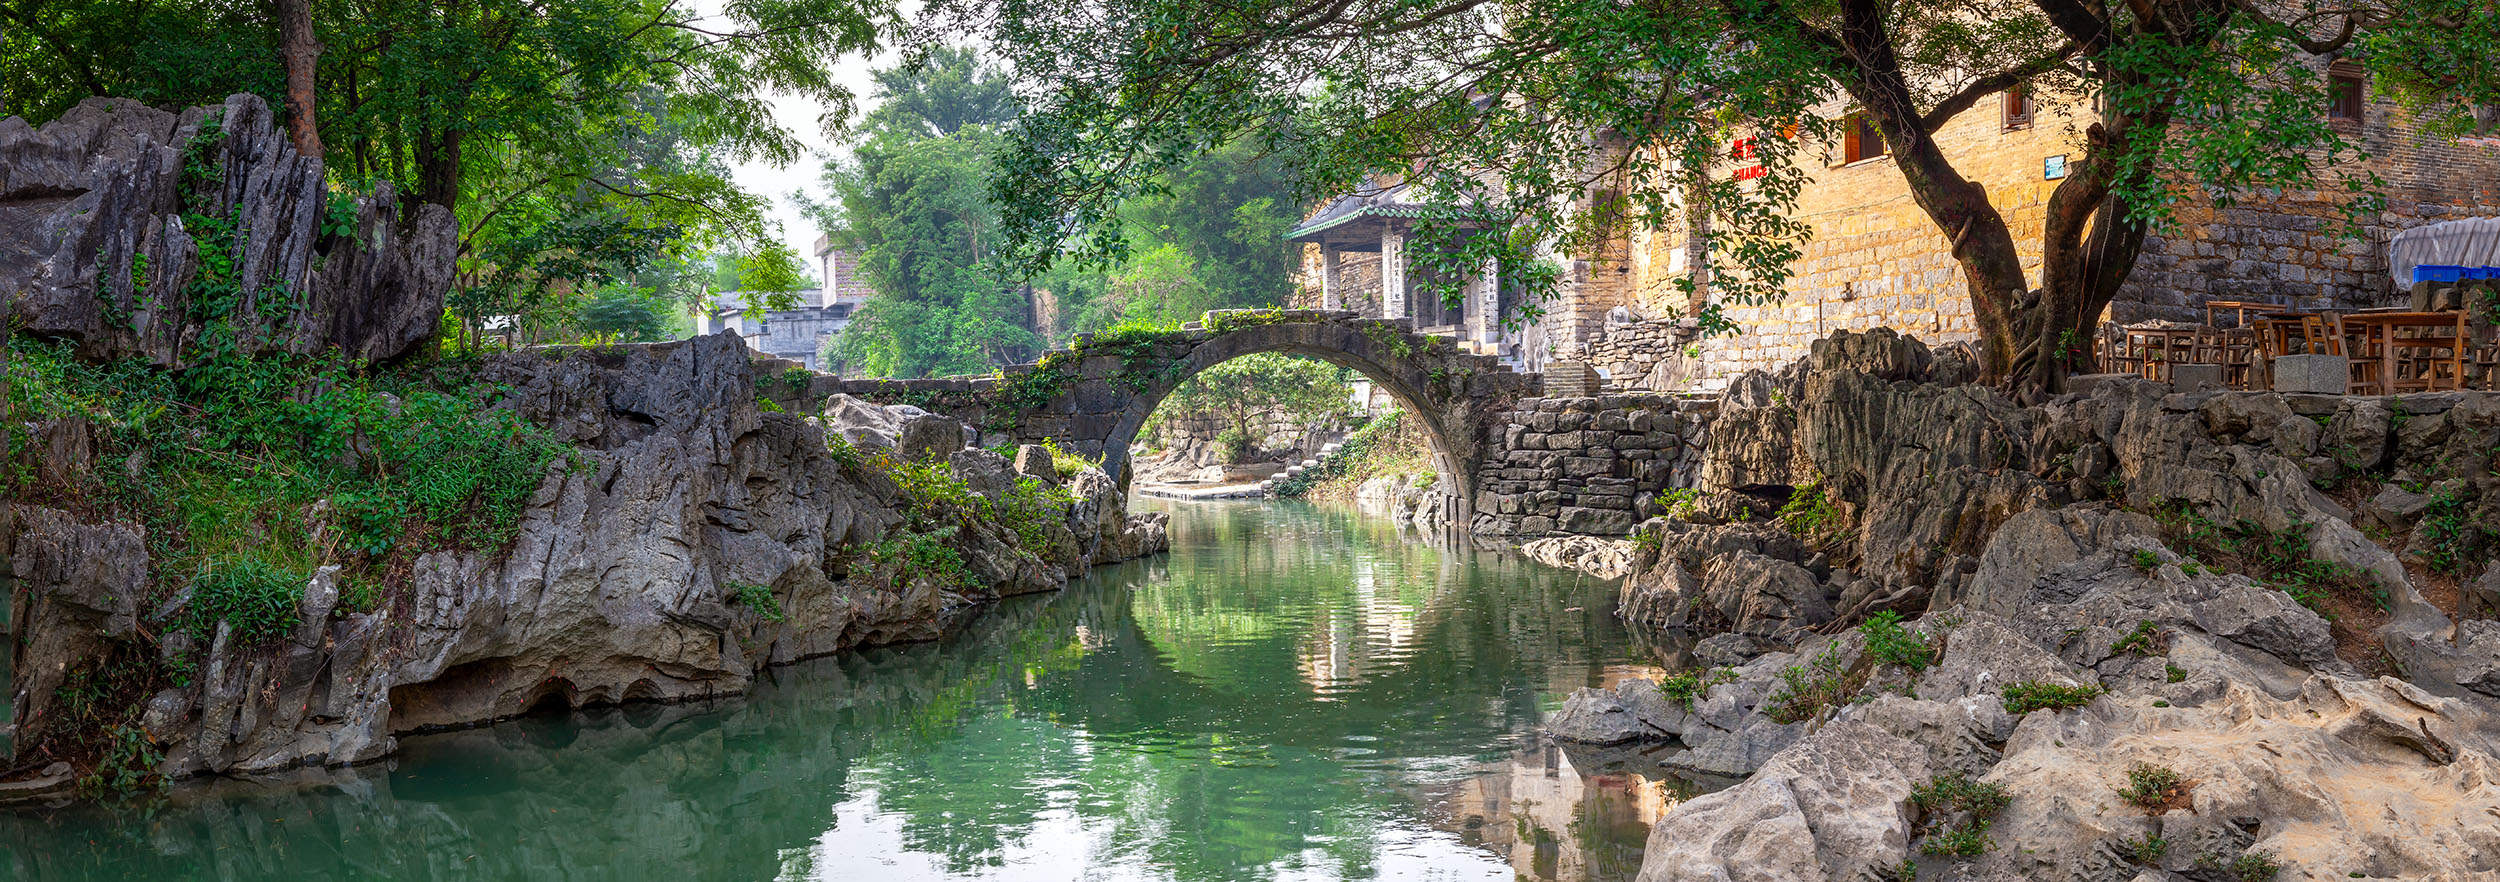 In the heart of Huangyao, Guangxi, China, I crafted this panoramic photograph, stitched together from nine individual images....